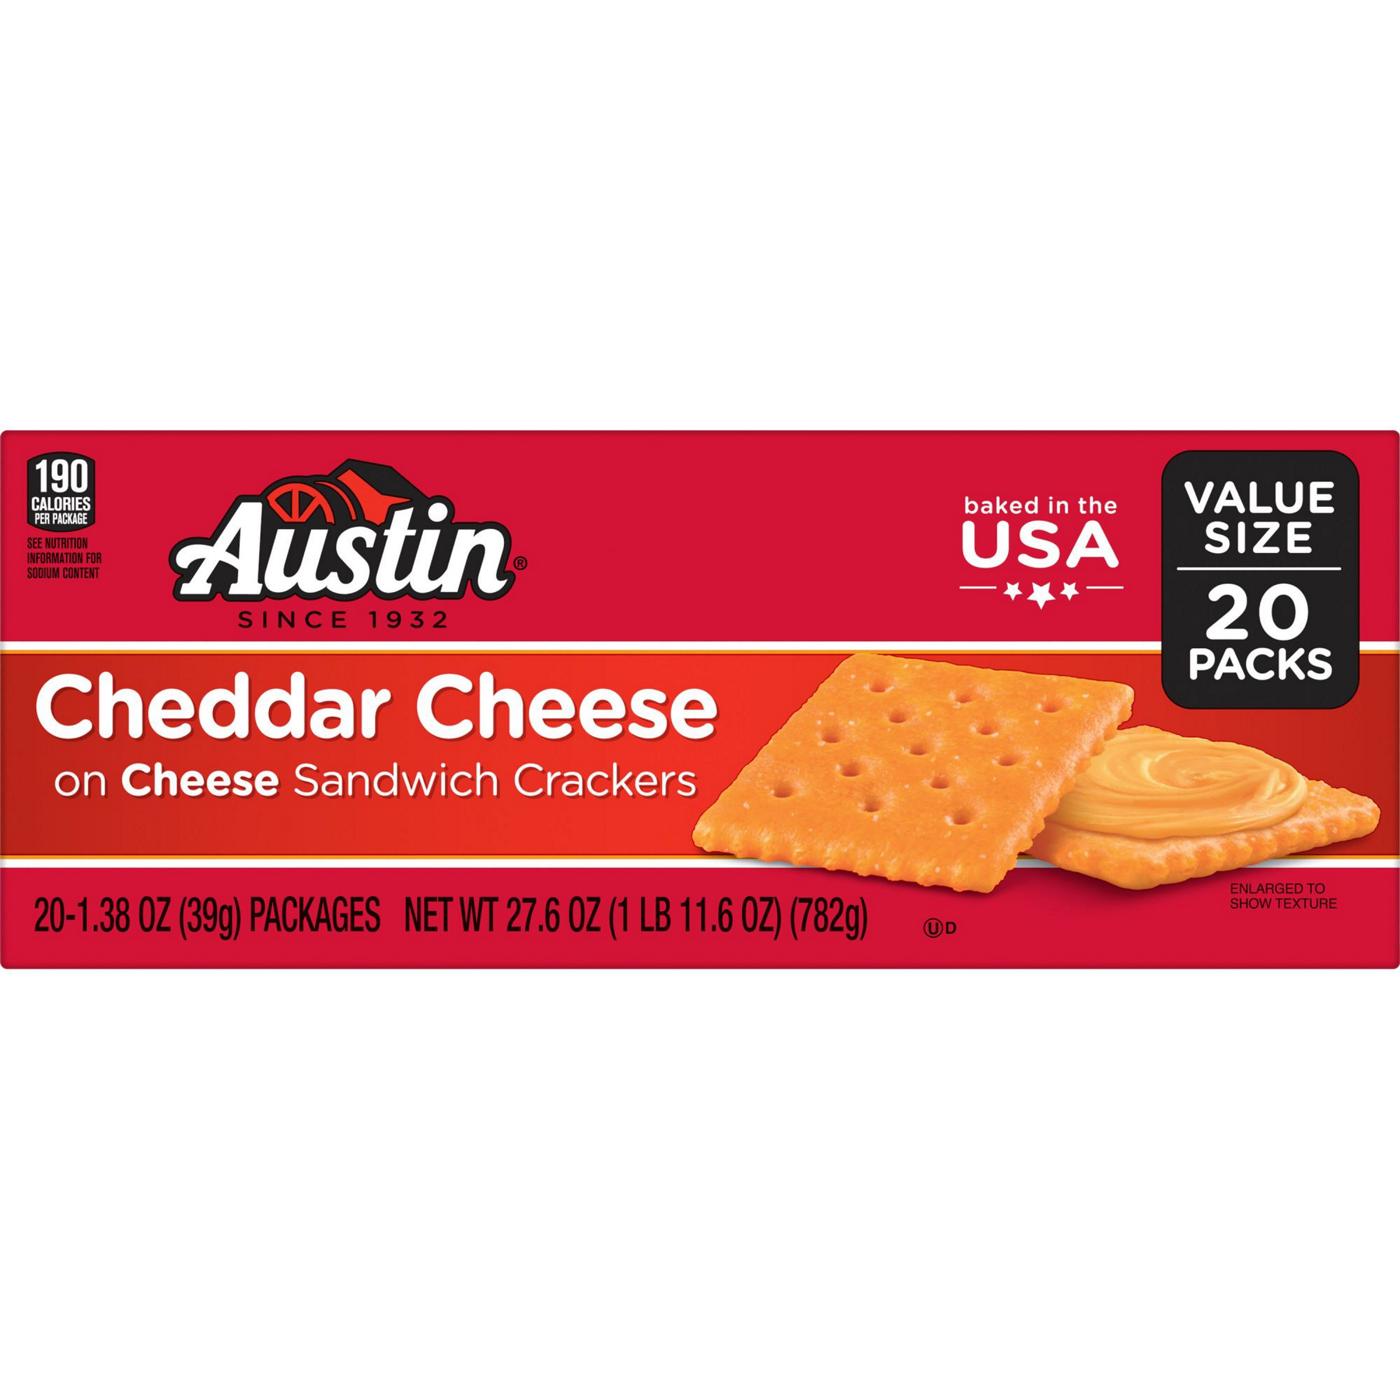 Austin Cheddar Cheese on Cheese Sandwich Crackers; image 1 of 3